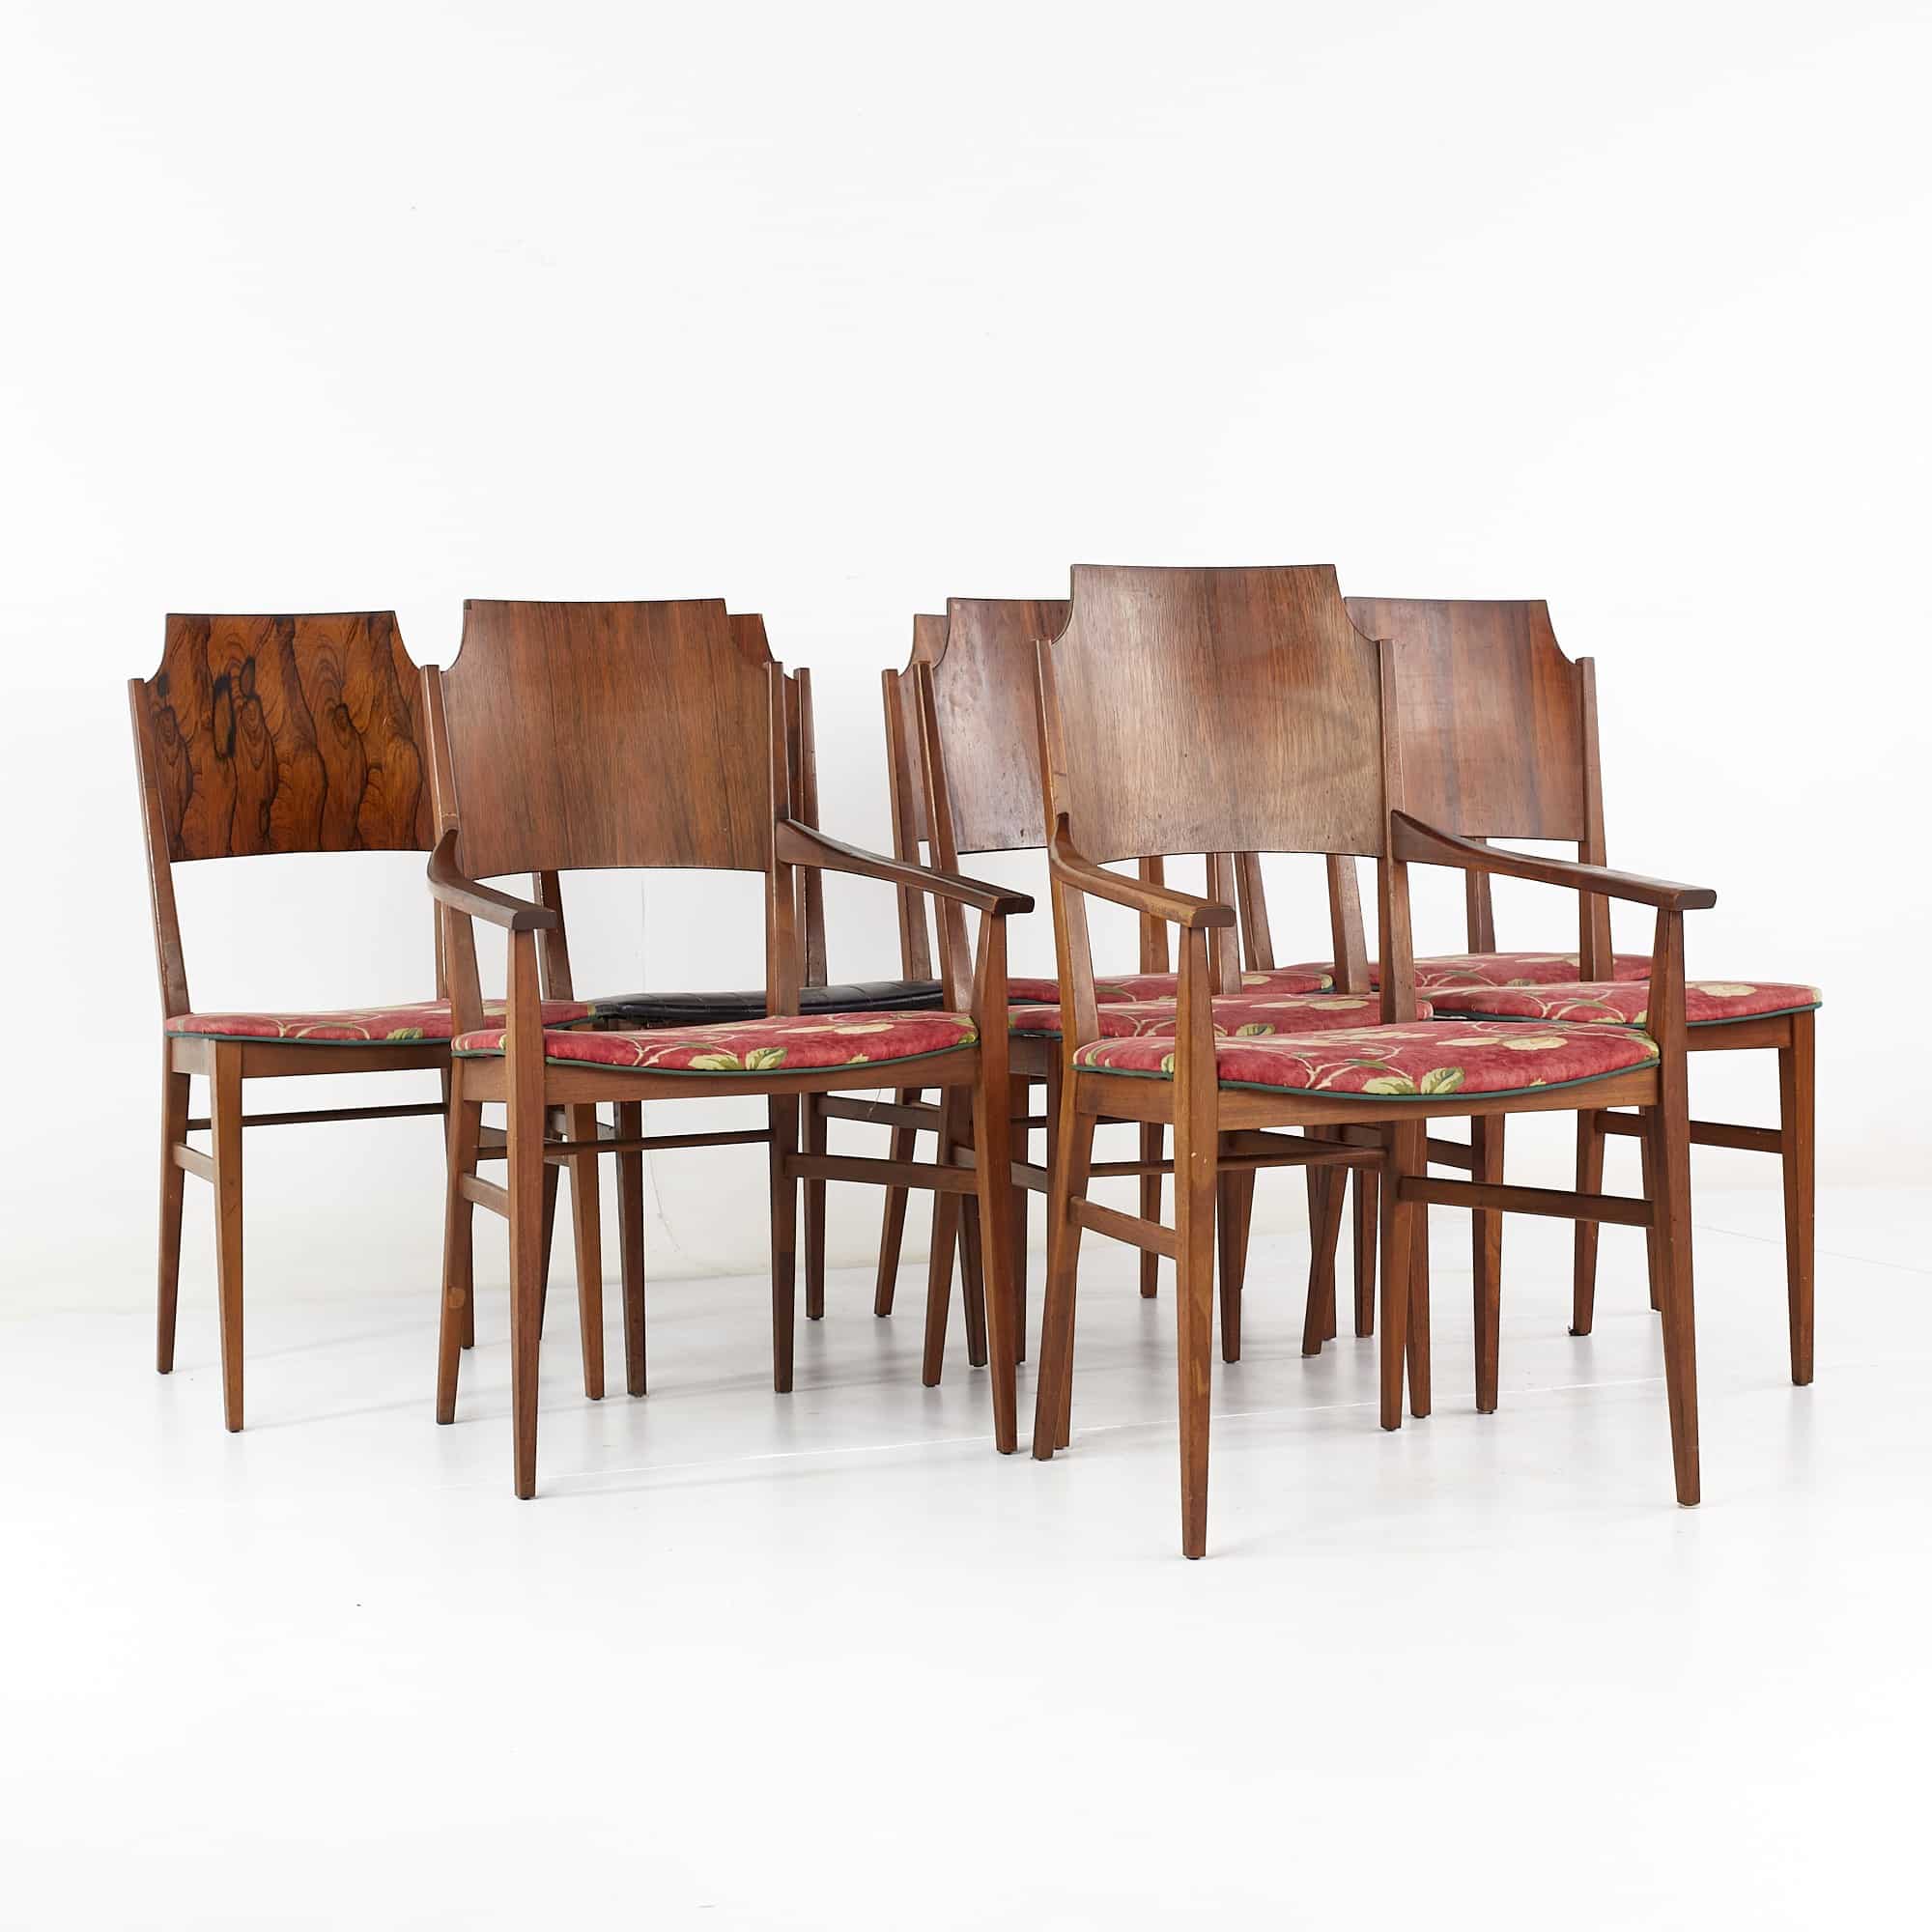 Paul Mccobb for Lane Delineator Mid Century Rosewood Dining Chairs - Set of 8